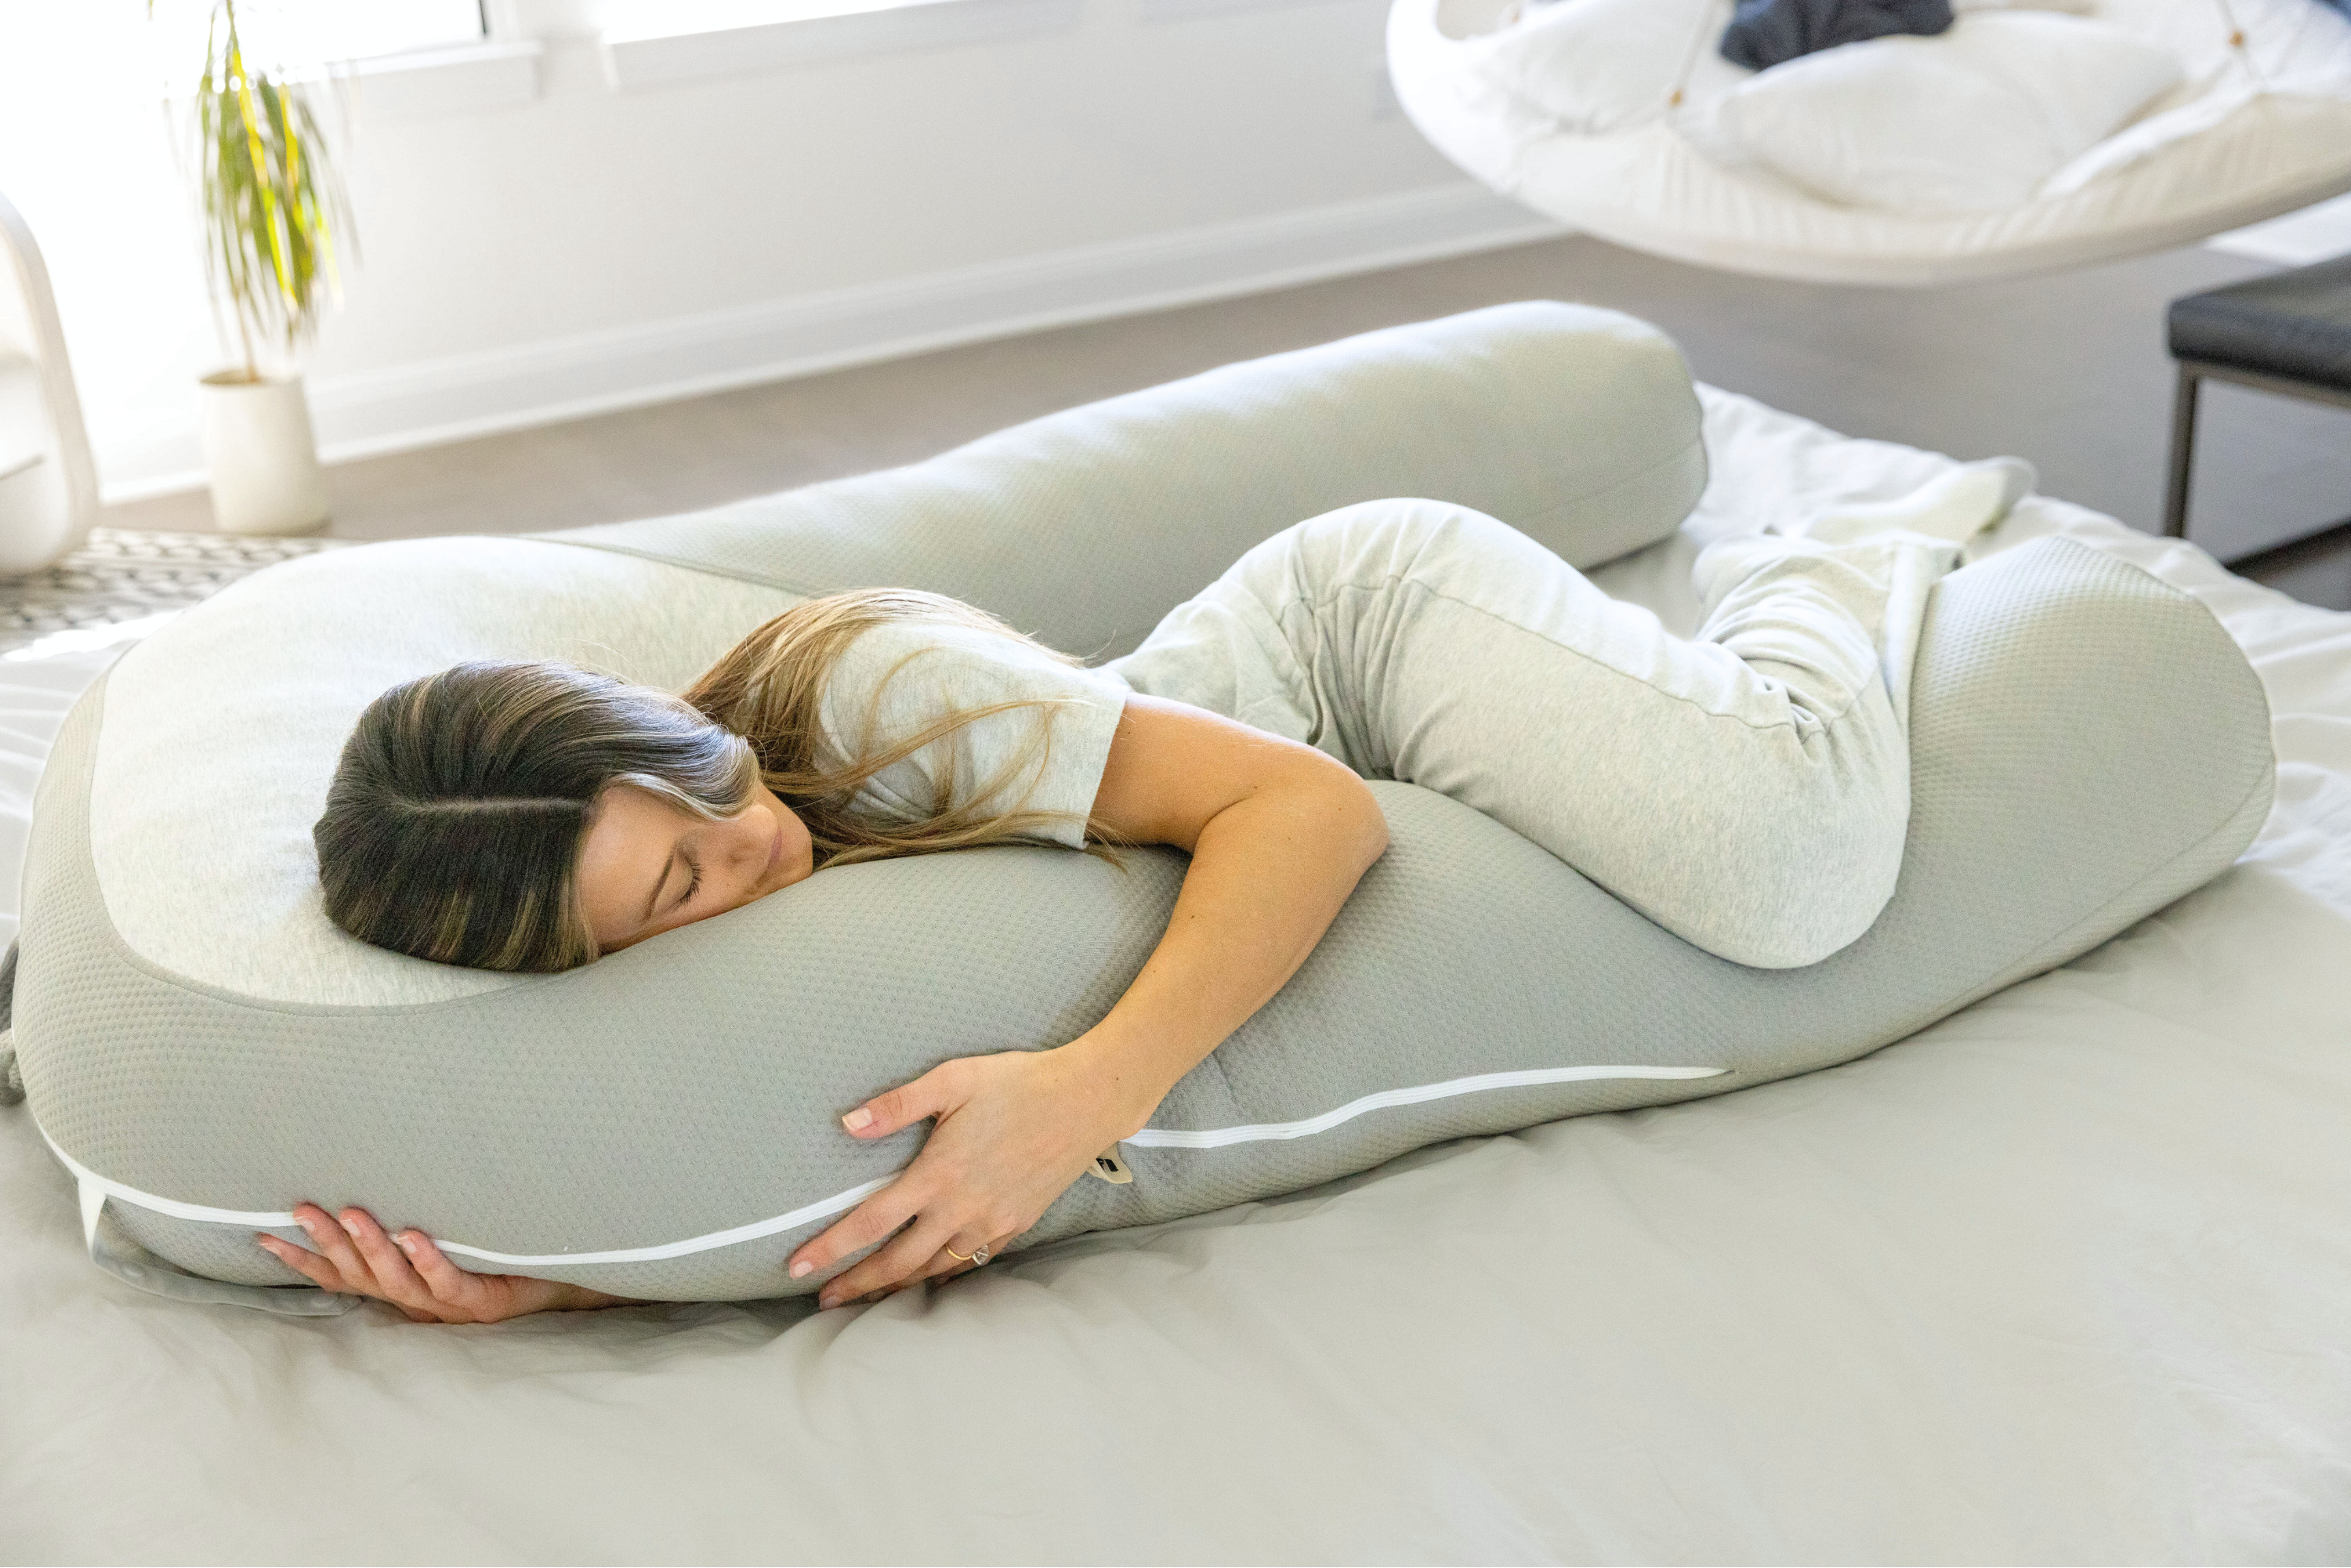 U Shaped Cooling Fabric Pregnancy Pillow